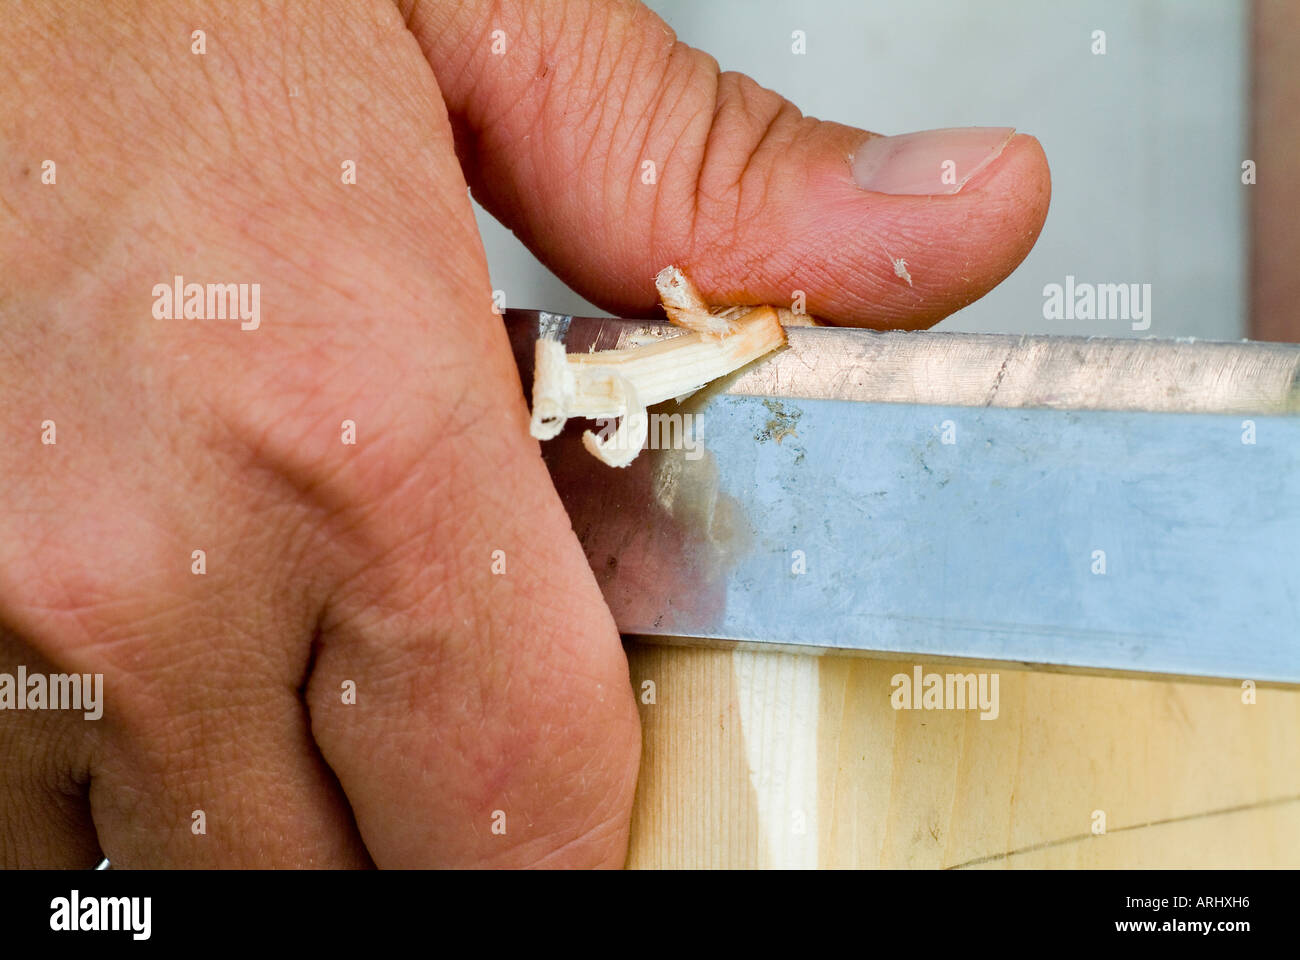 danger for accident dangerous action hand with a wounded hurt bloody thumb with a plaster by carving a piece of wood Stock Photo